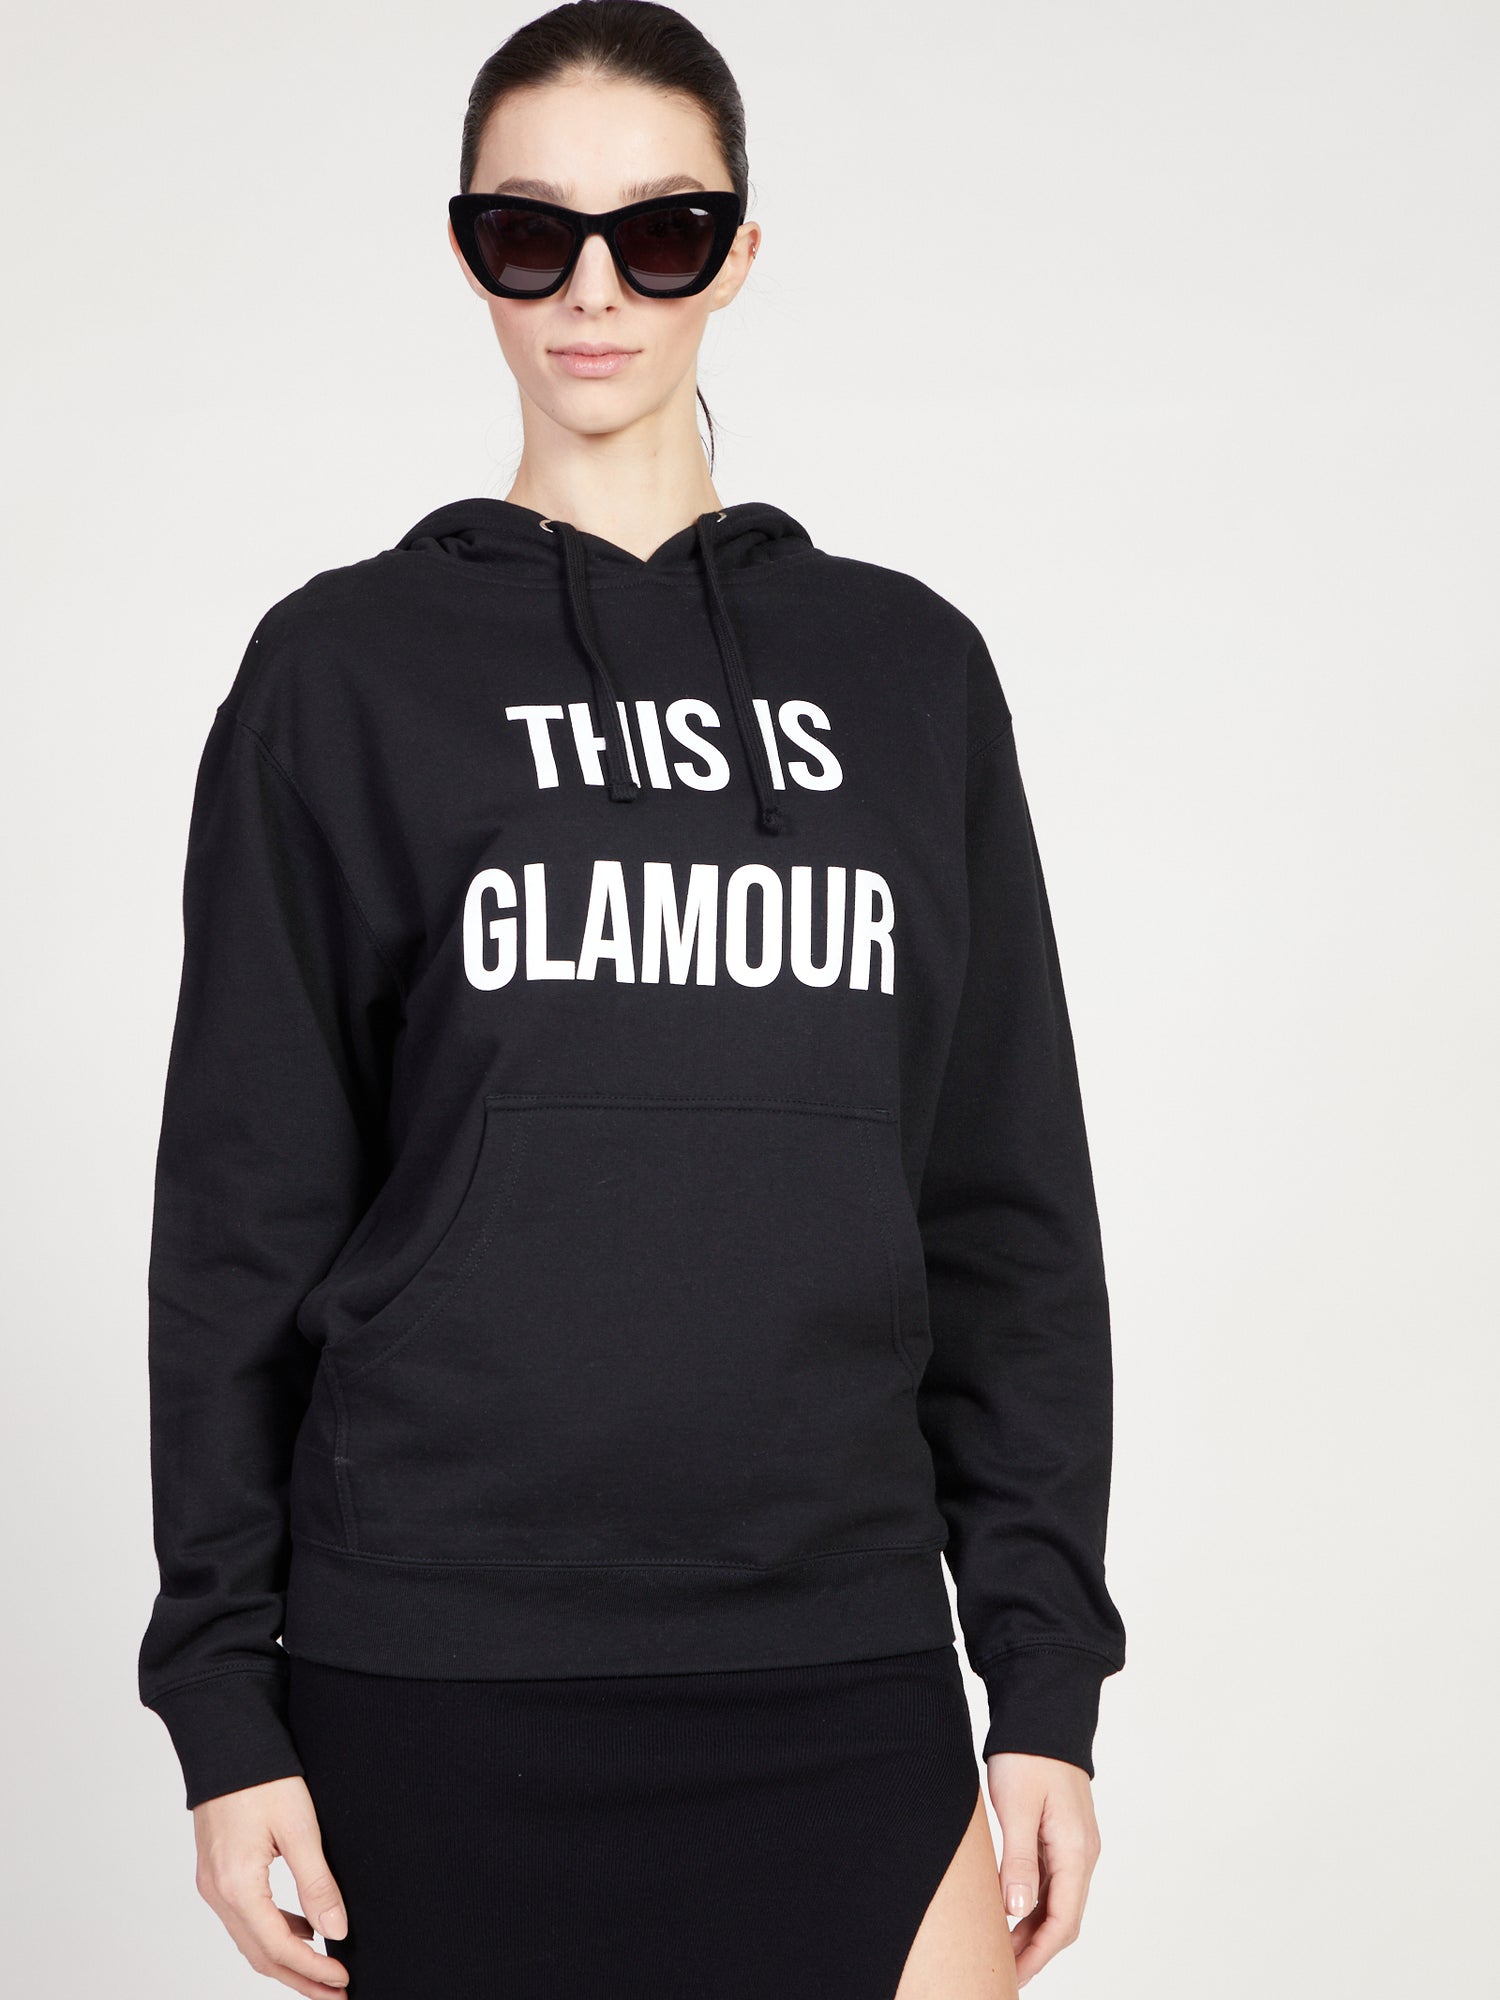 "This is Glamour" Hoodie